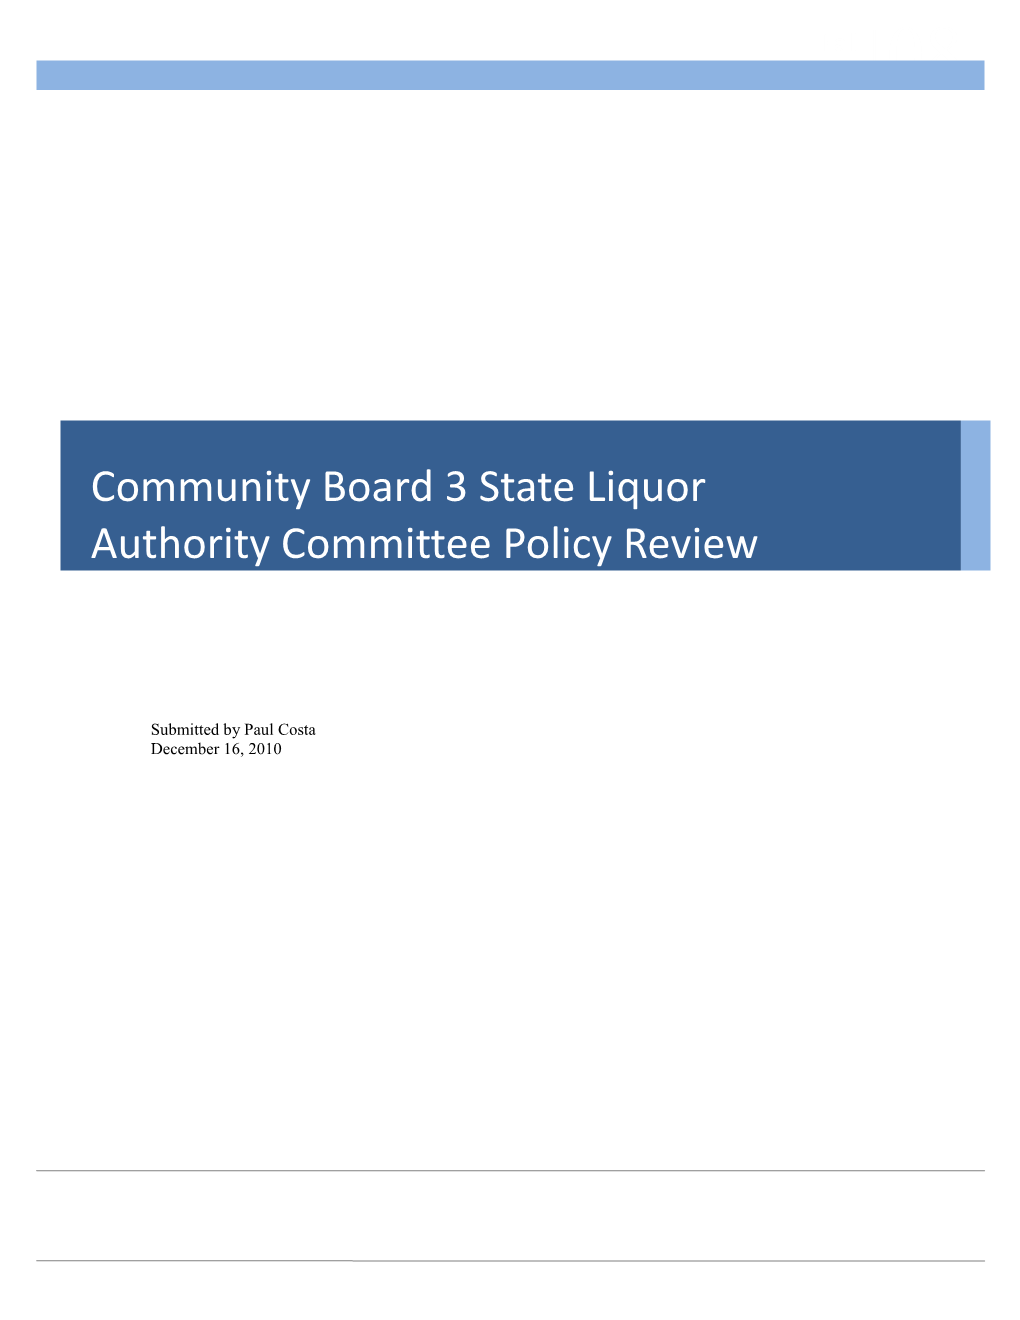 Community Board 3 State Liquor Authority Committee Policy Review